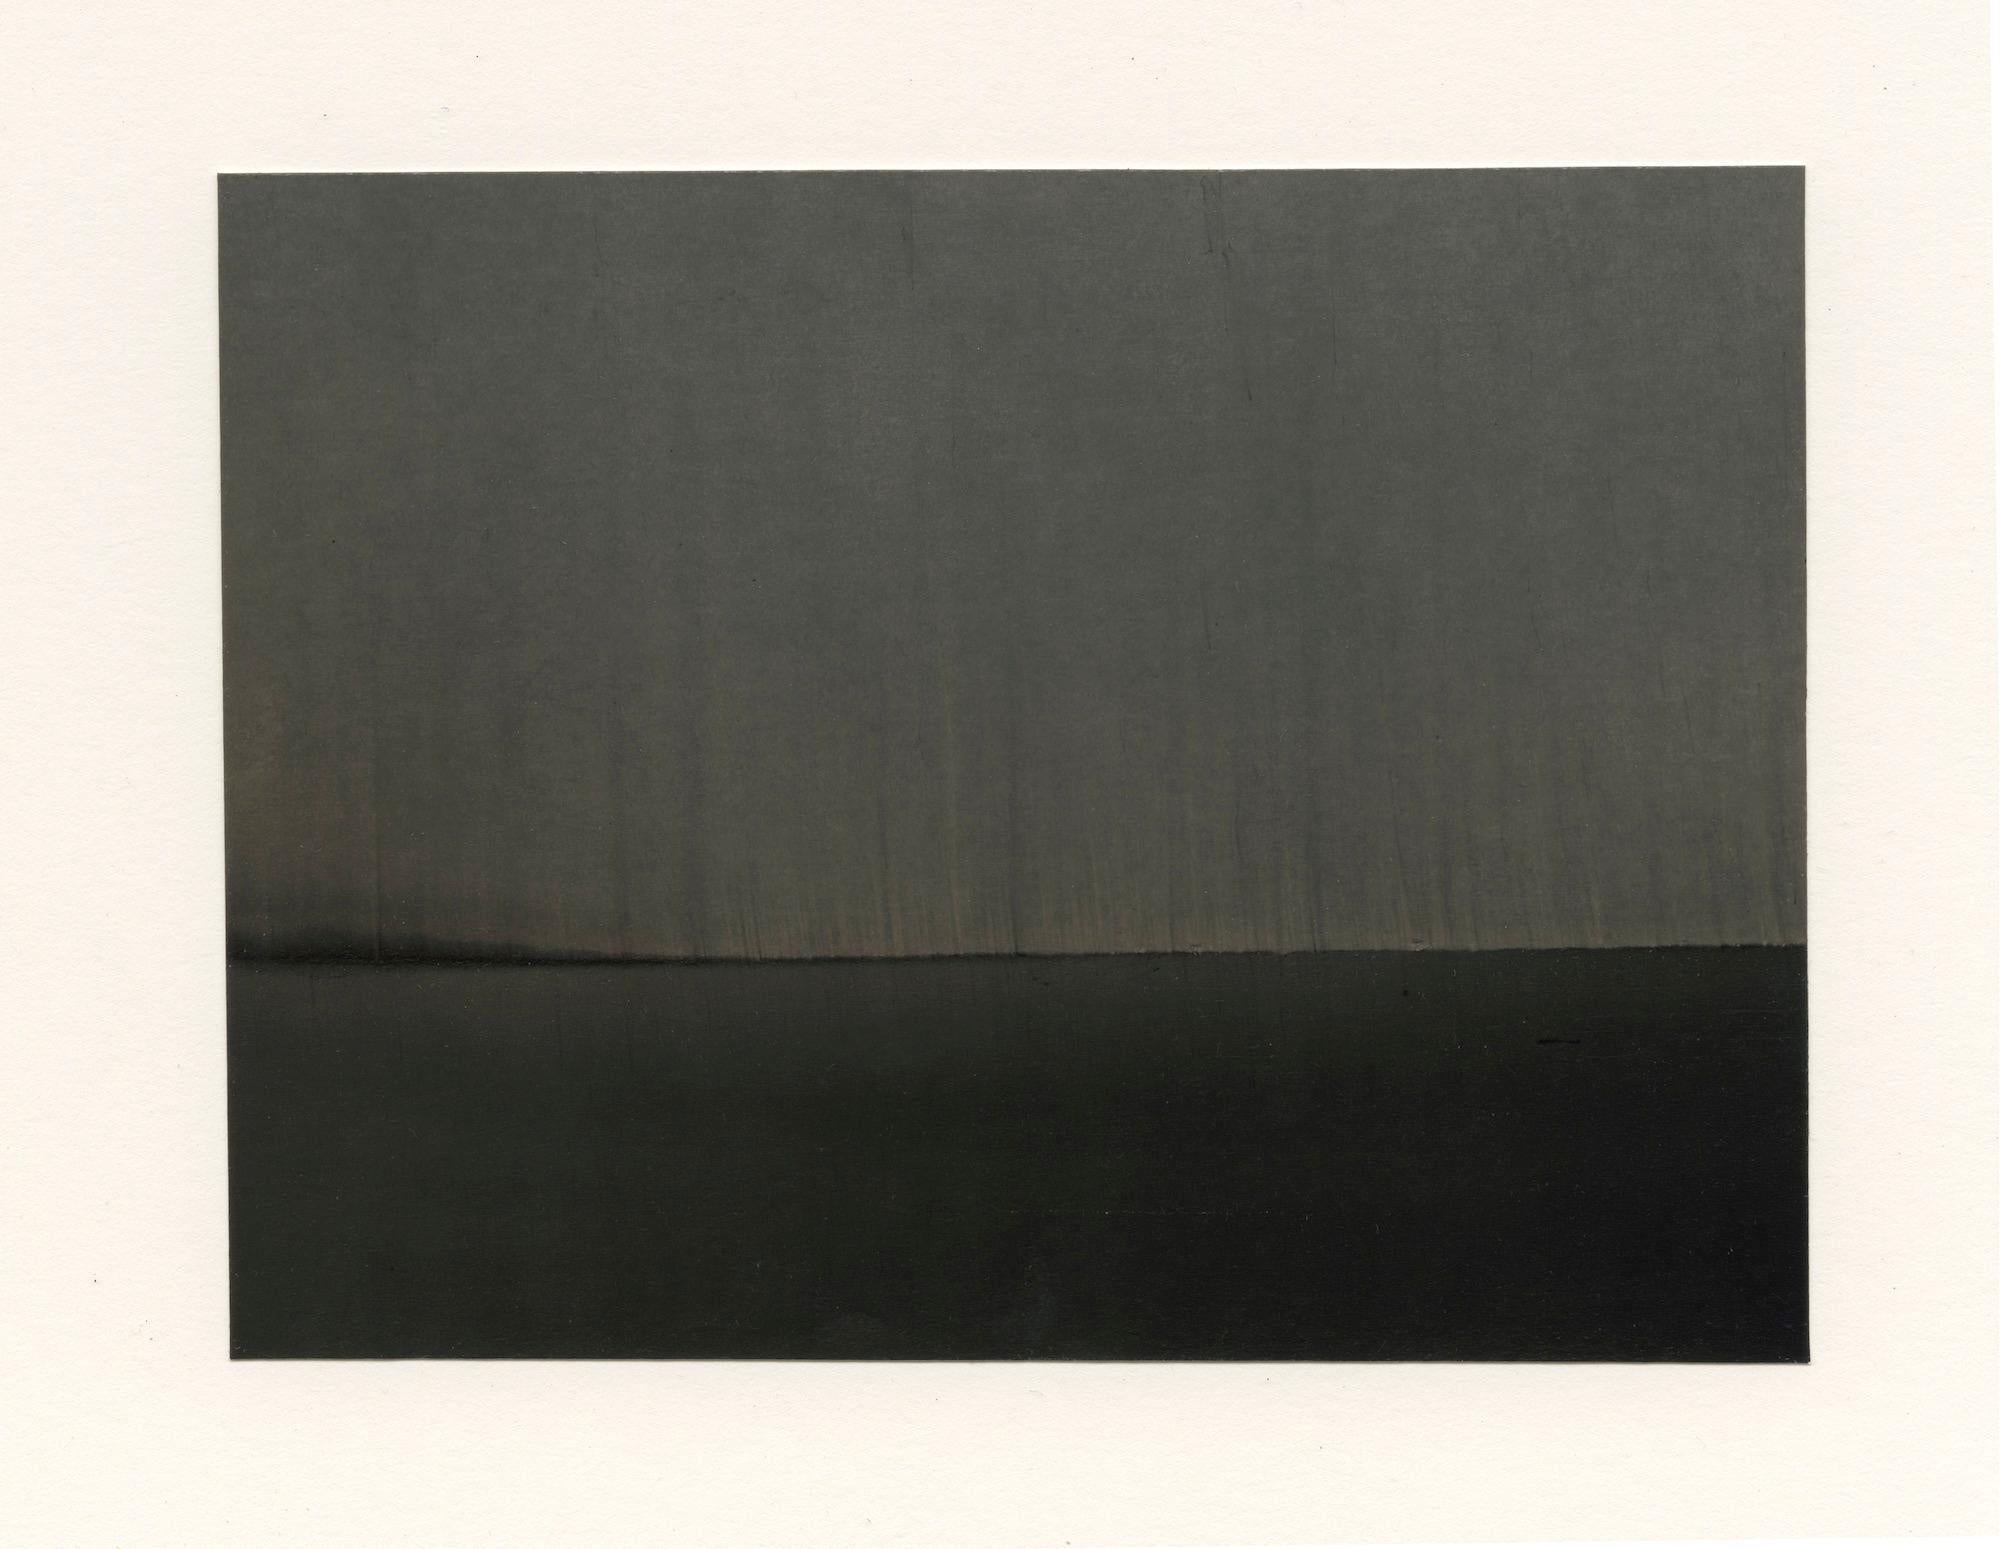 Abstract Photograph Christopher Colville - Horaires sombres Horizon 99